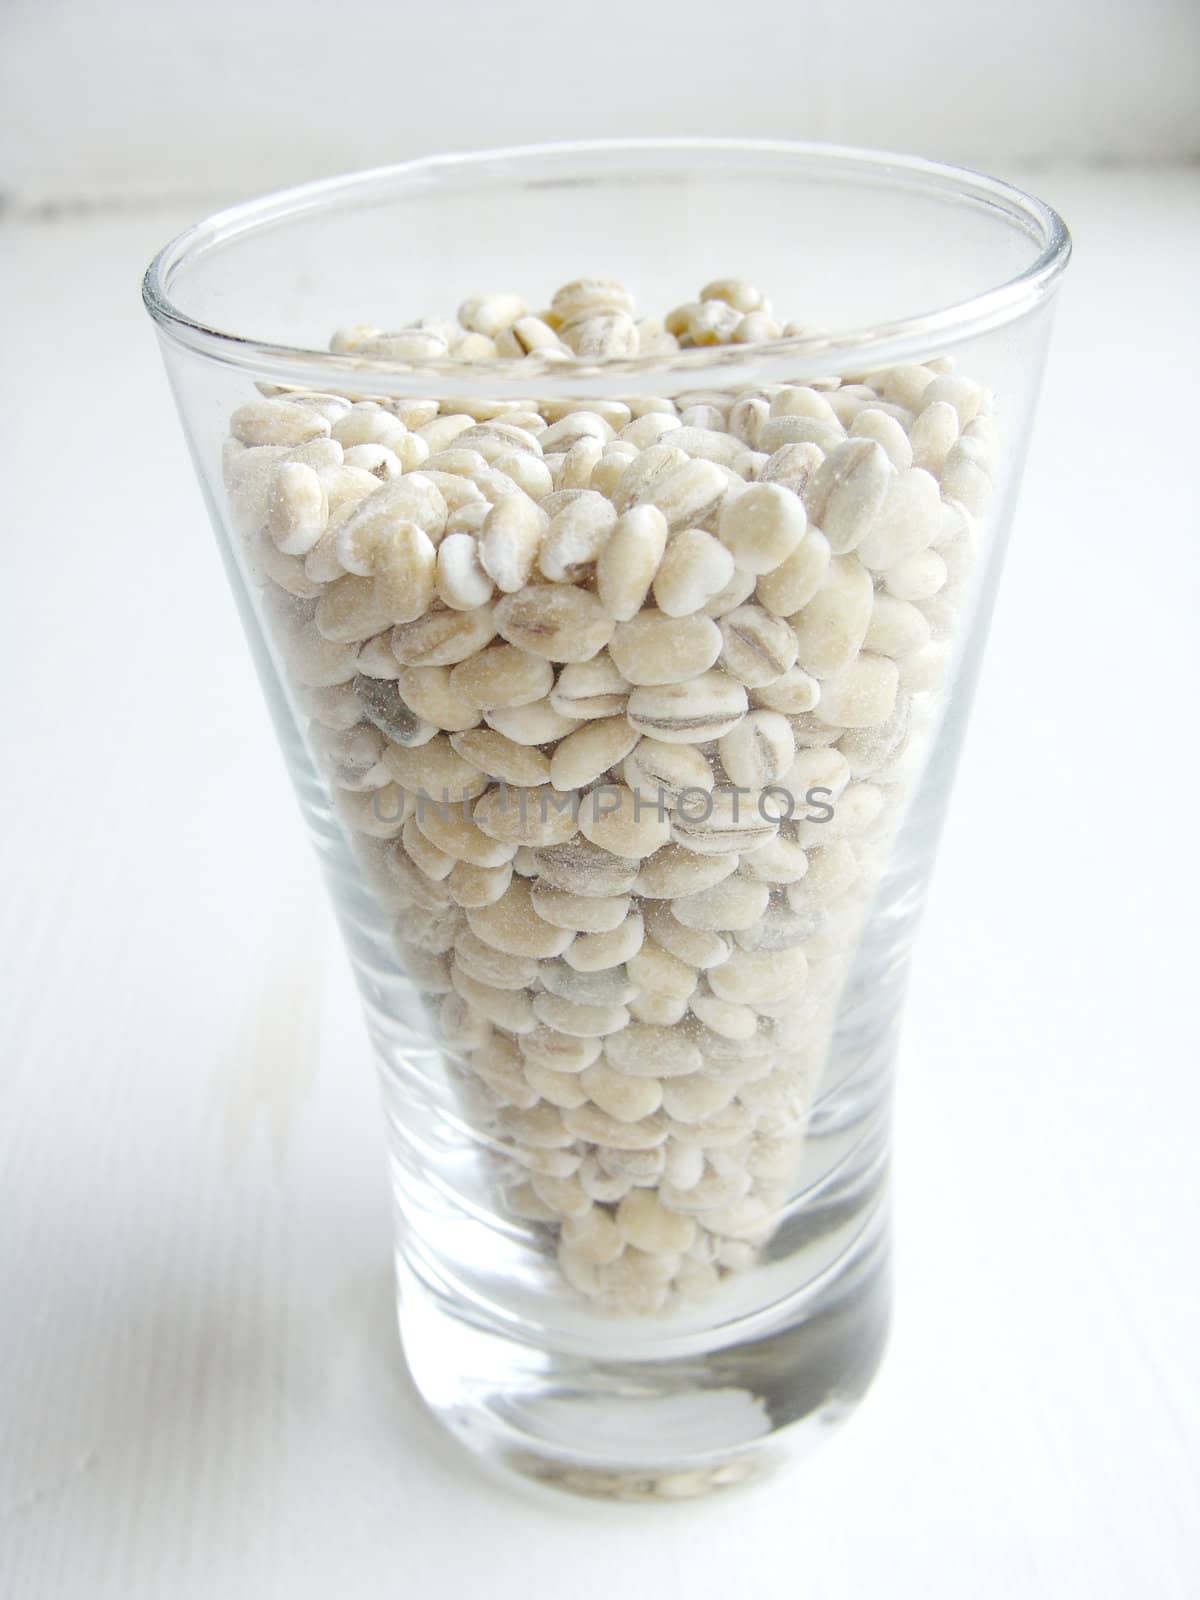 Pearl barley in a glass close up 